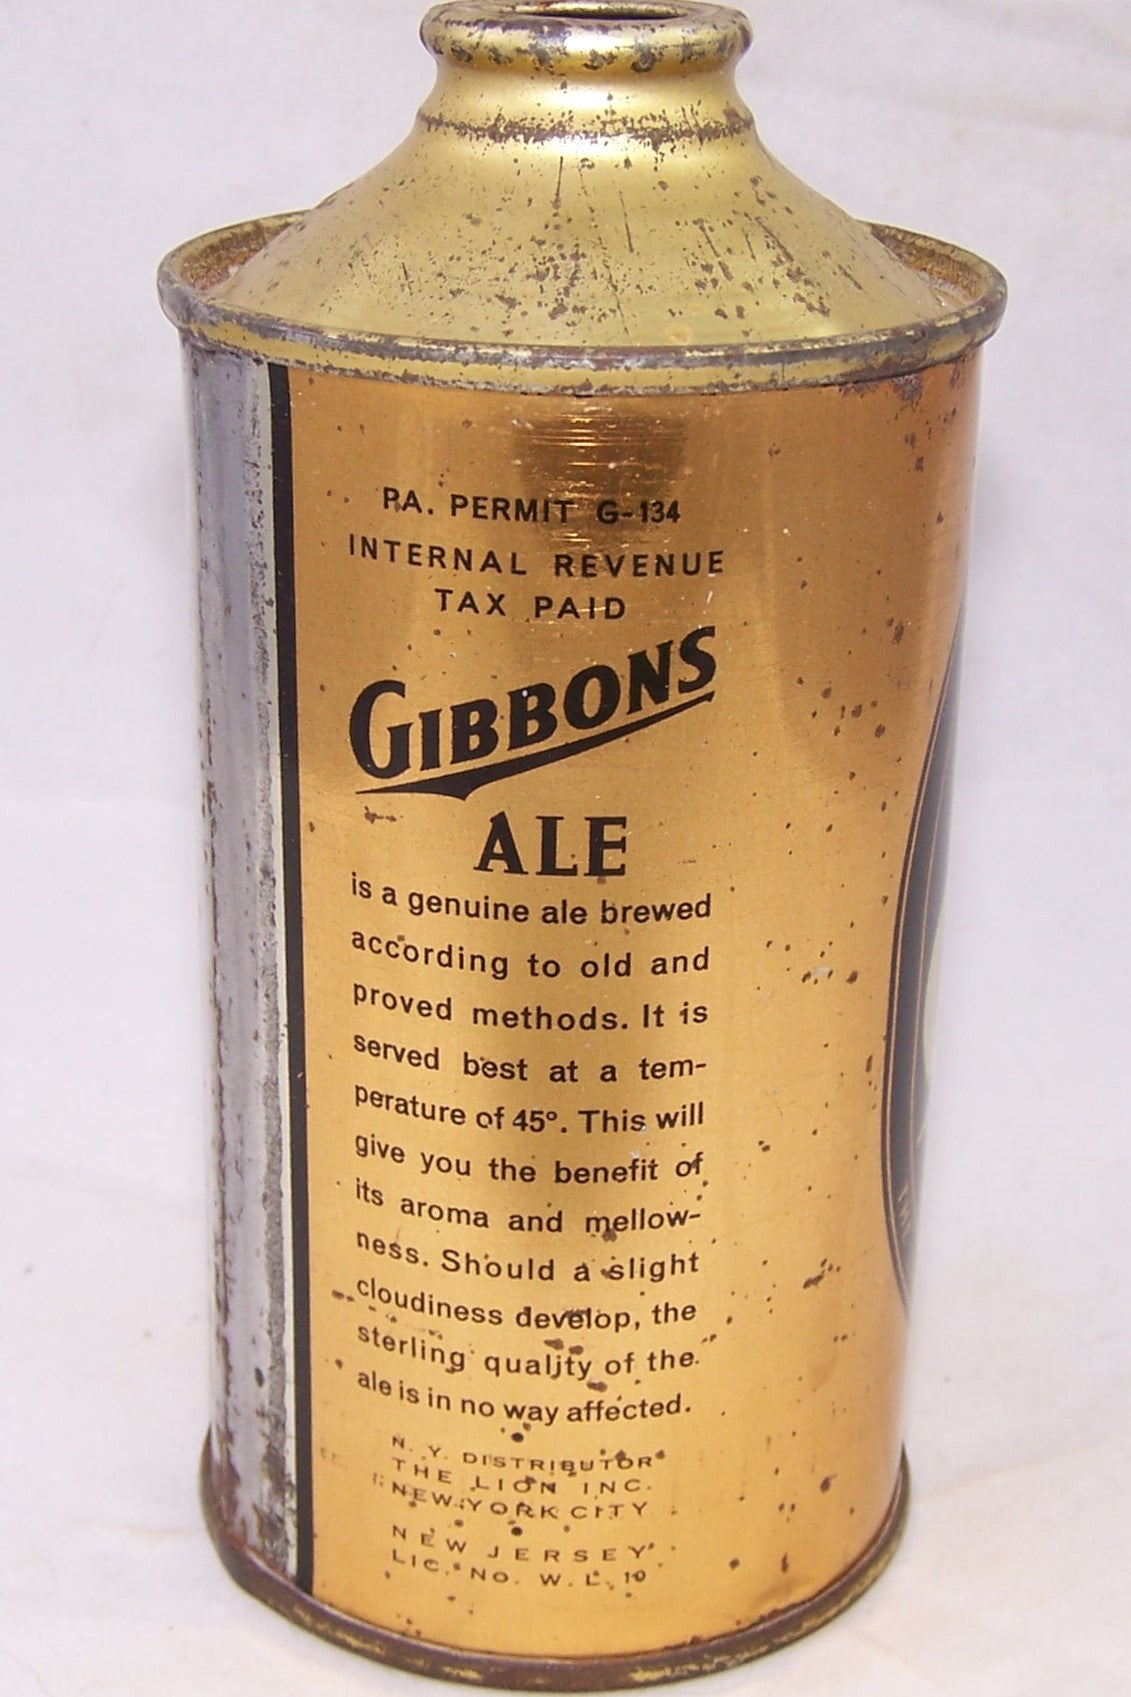 Gibbons Ale USBC 164-25, Grade 1- Sold on 05/19/19